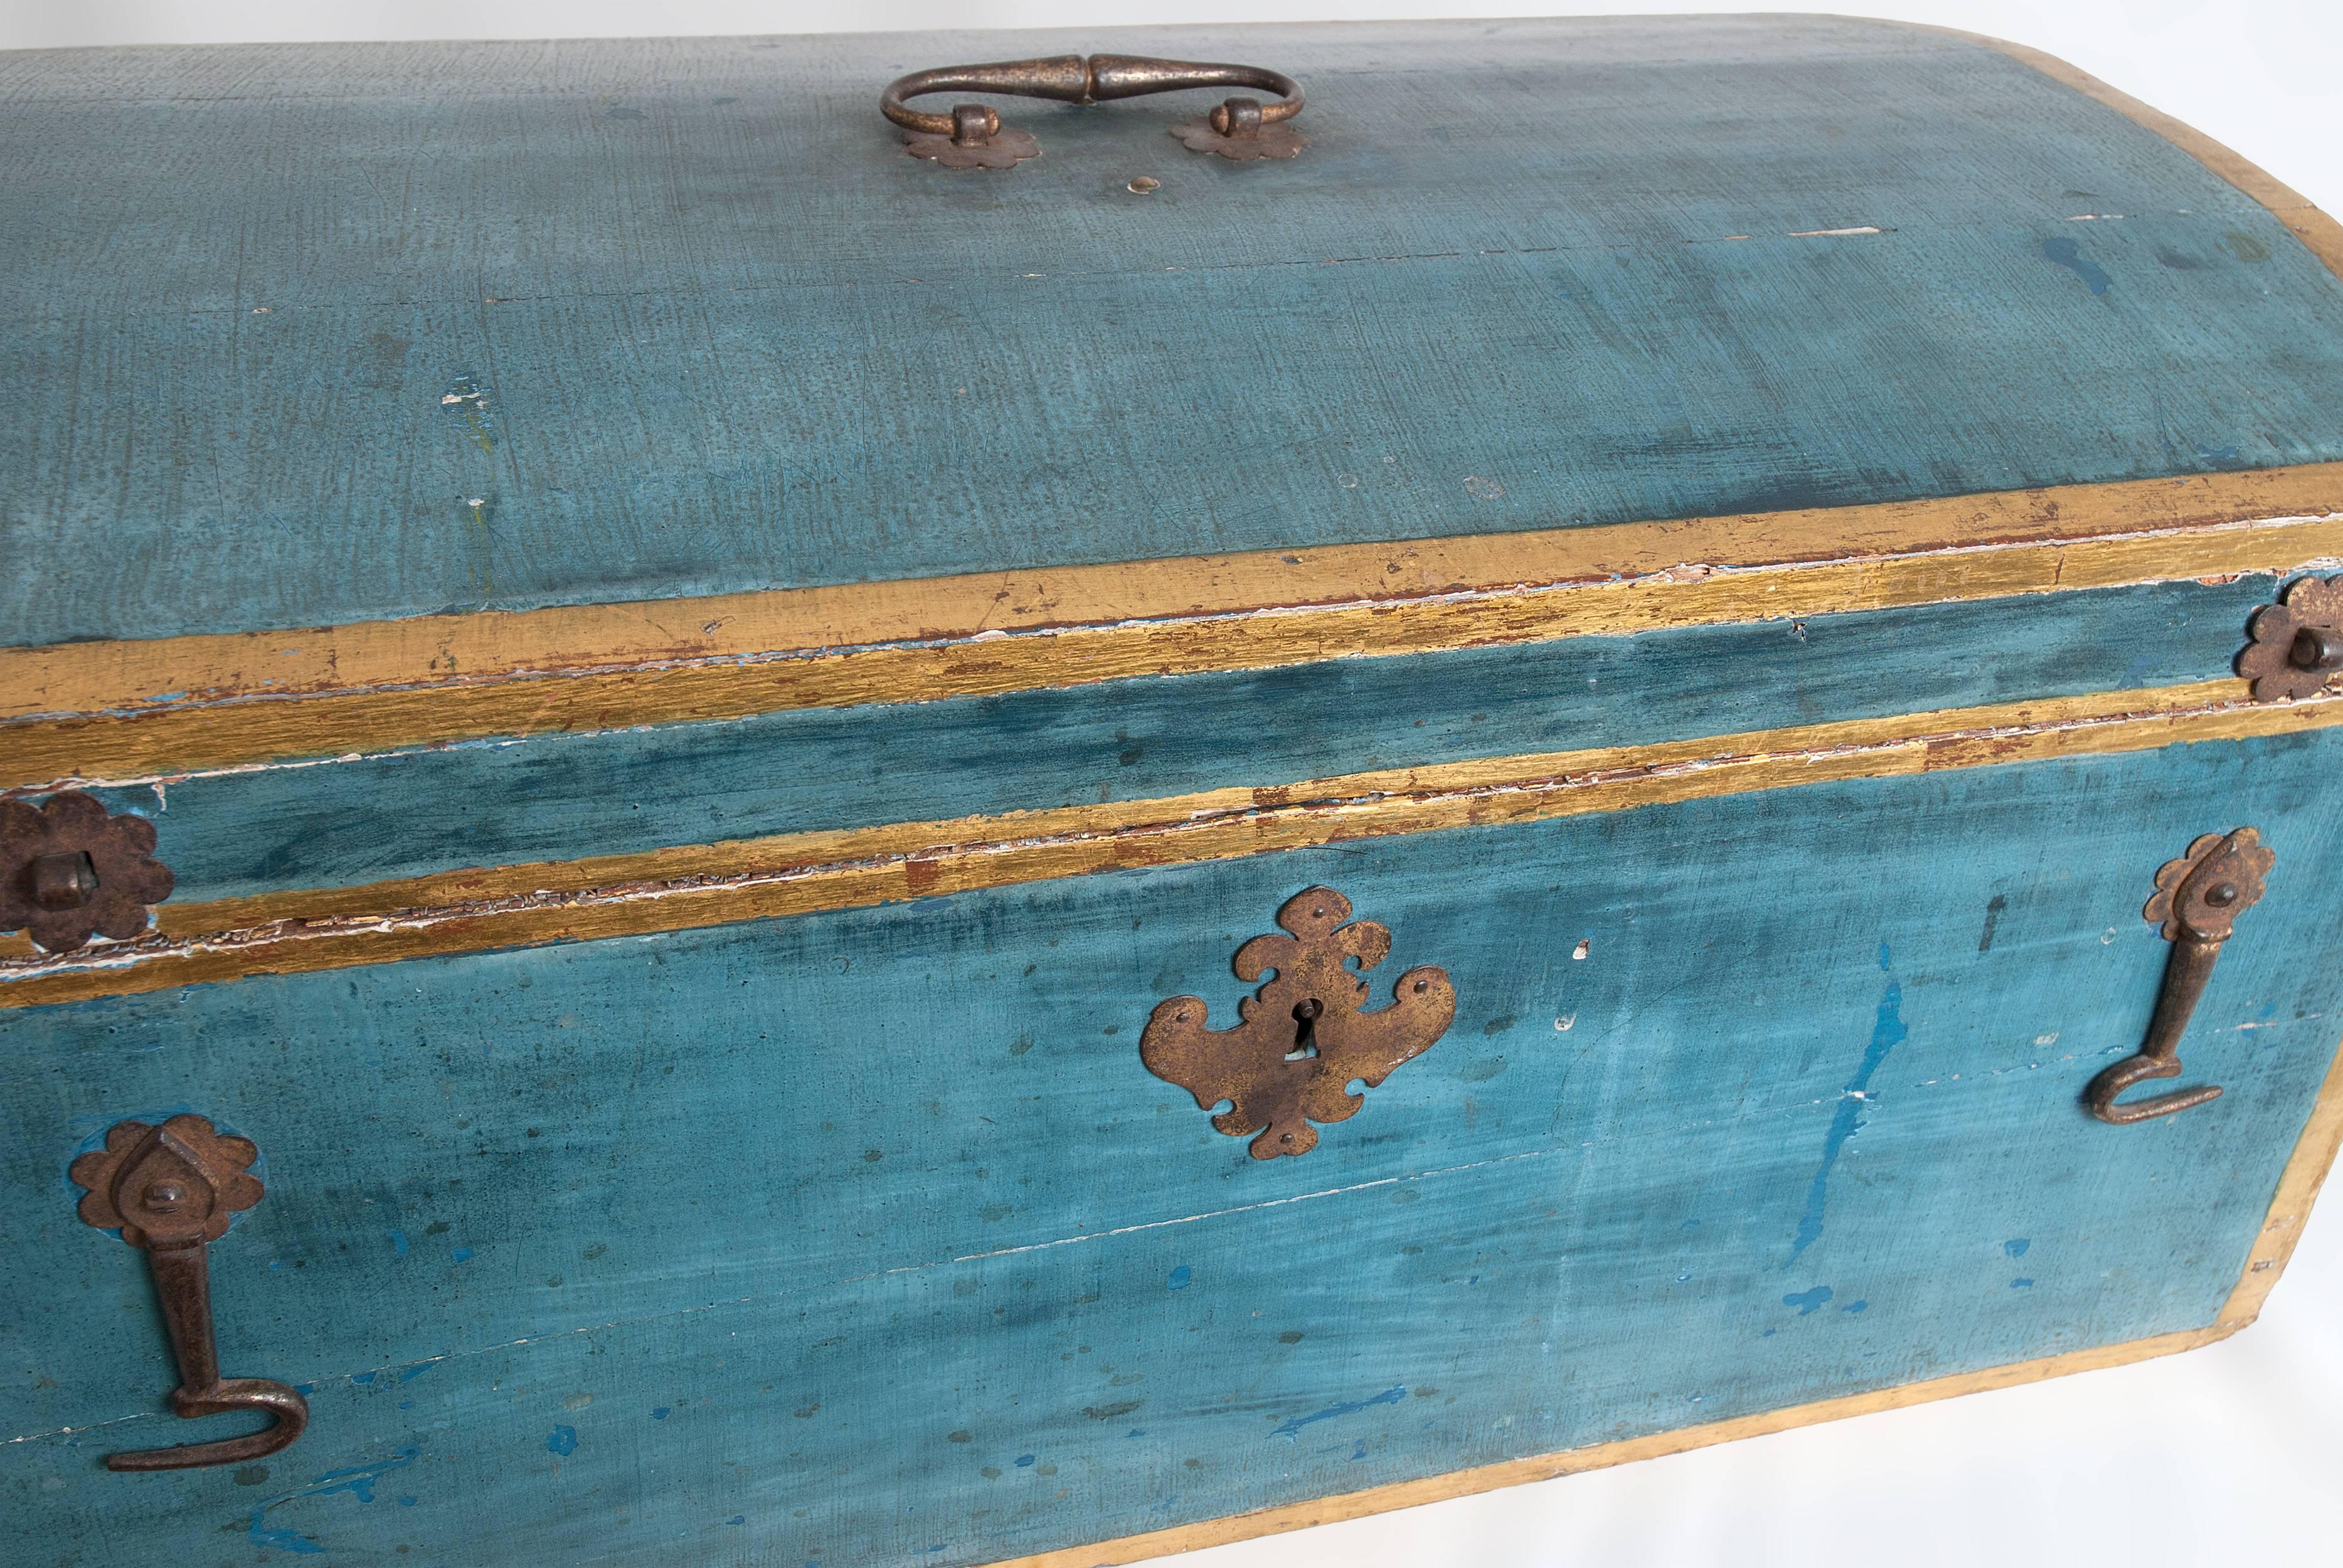 A blue painted and decorated wooden dome-top chest with yellow and gold border and bail handle and decorative escutcheon and double latches.
The interior has the original silk liner